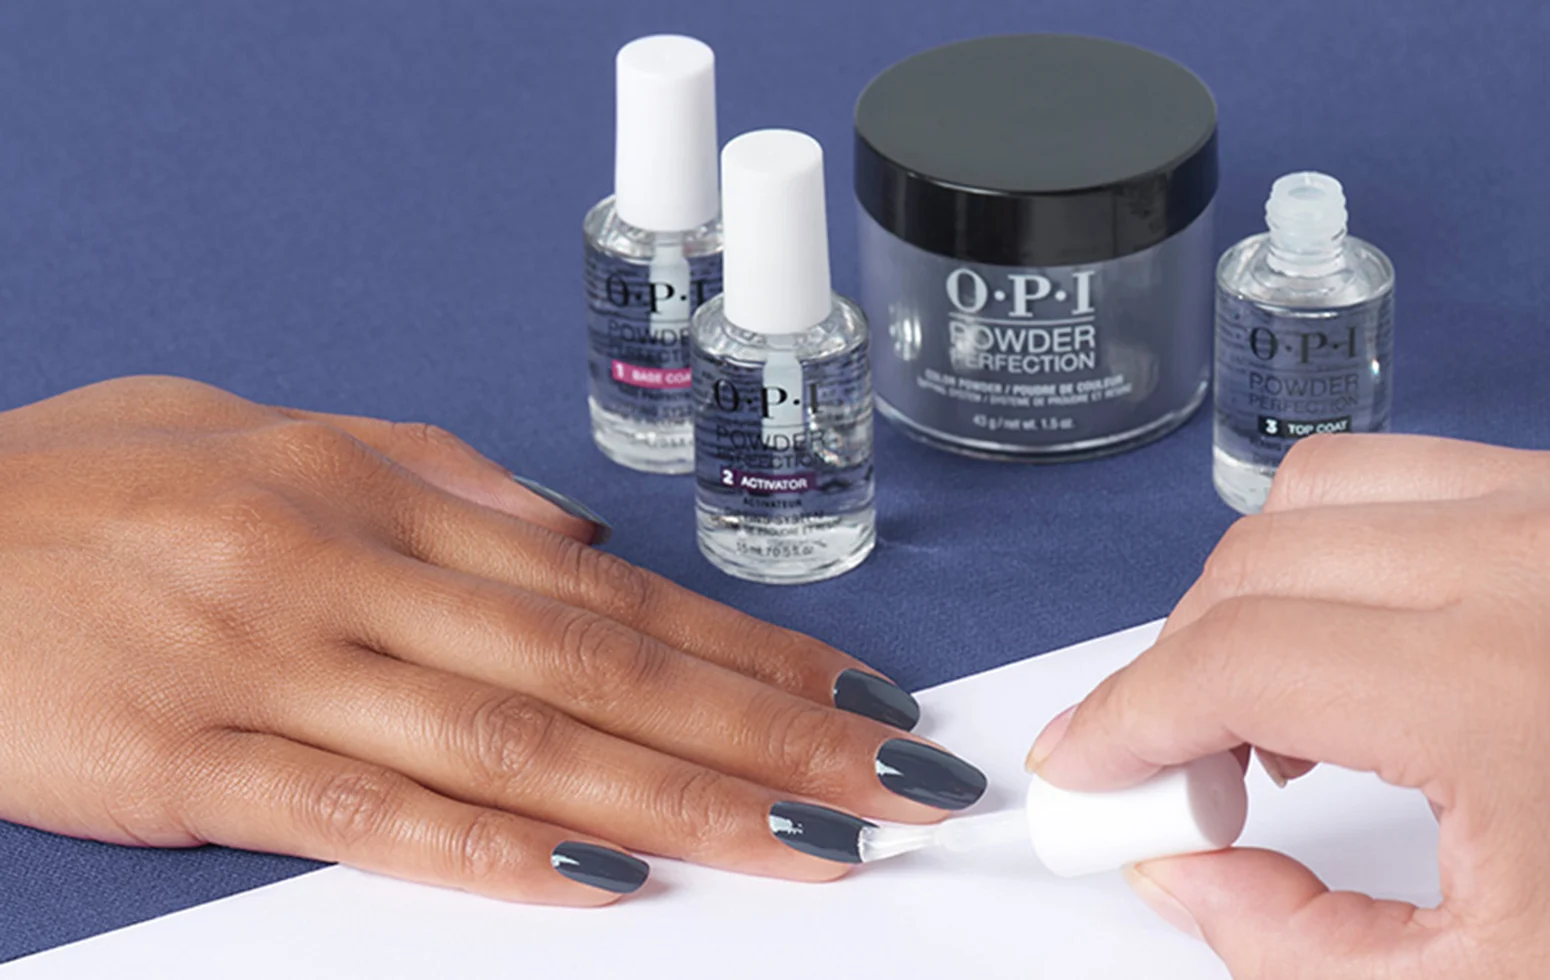 Pro Tips: 51 New Shades in OPI Powder Perfection